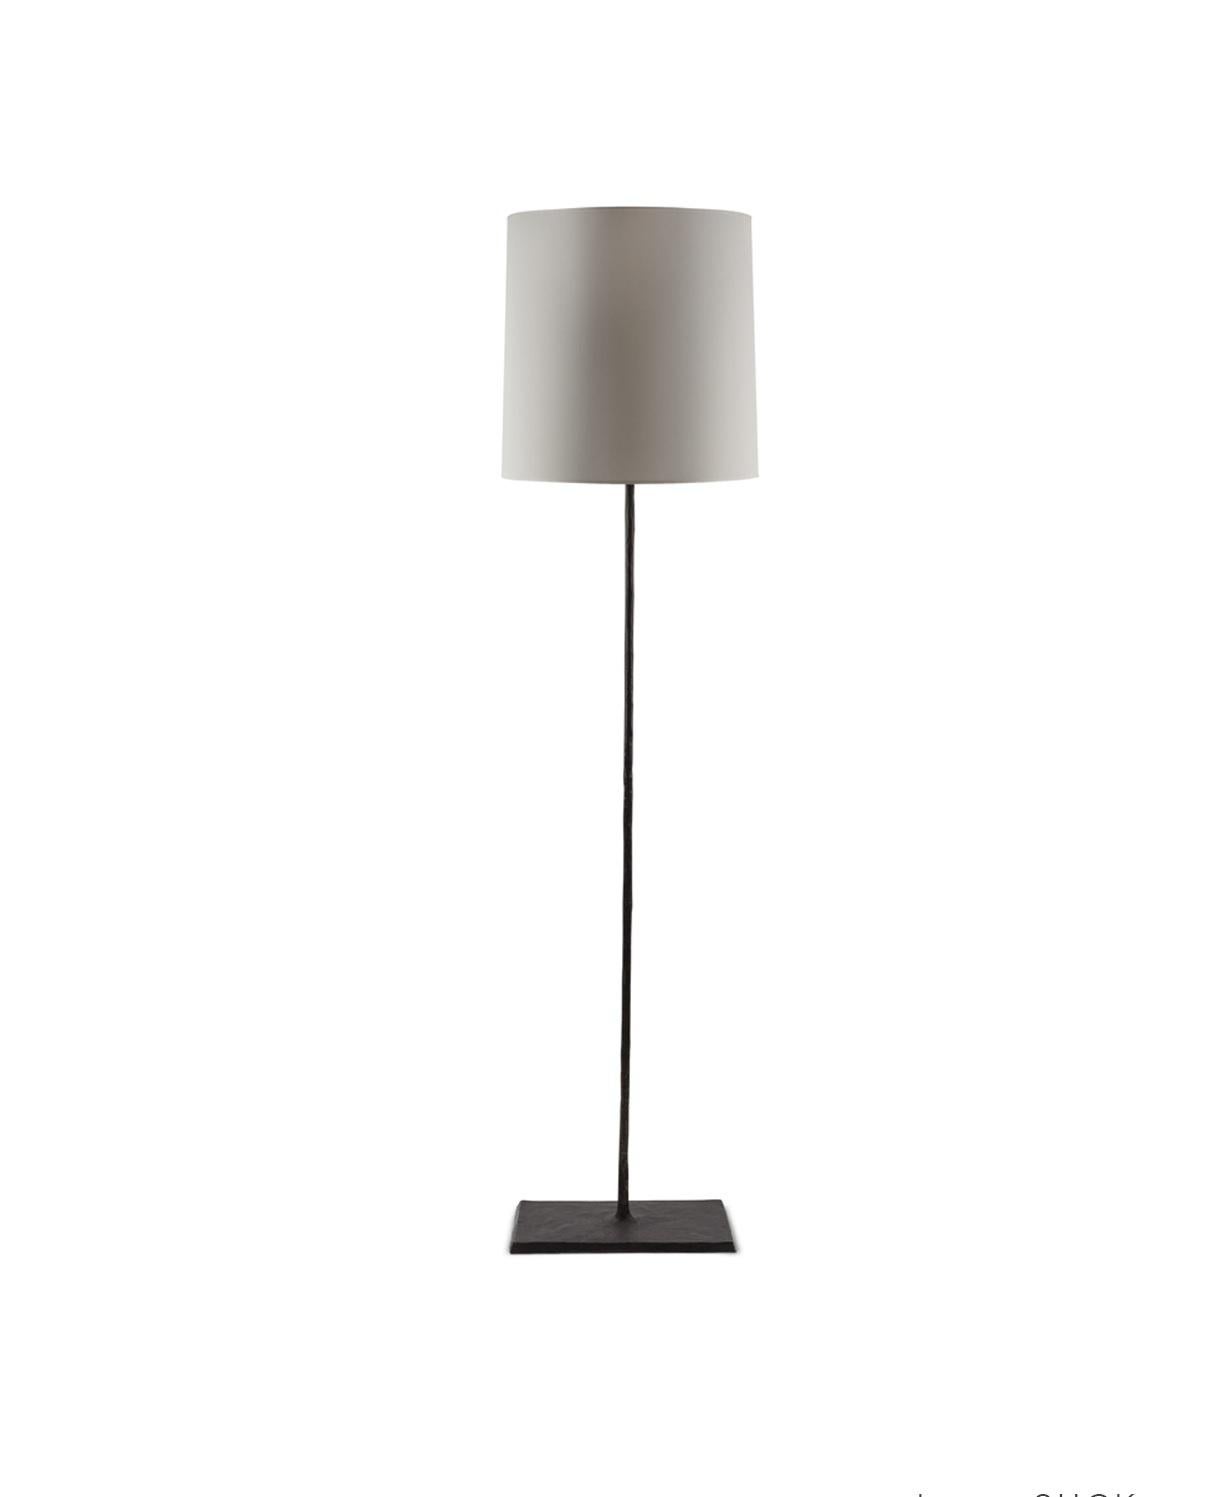 Suck Floor Lamp by LK Edition
Dimensions: 17 x 15 x H 175 cm 
Materials: Black Patinated Bronze. 
Also available with Paper Shade.  
All our lamps can be wired according to each country. If sold to the USA it will be wired for the USA for